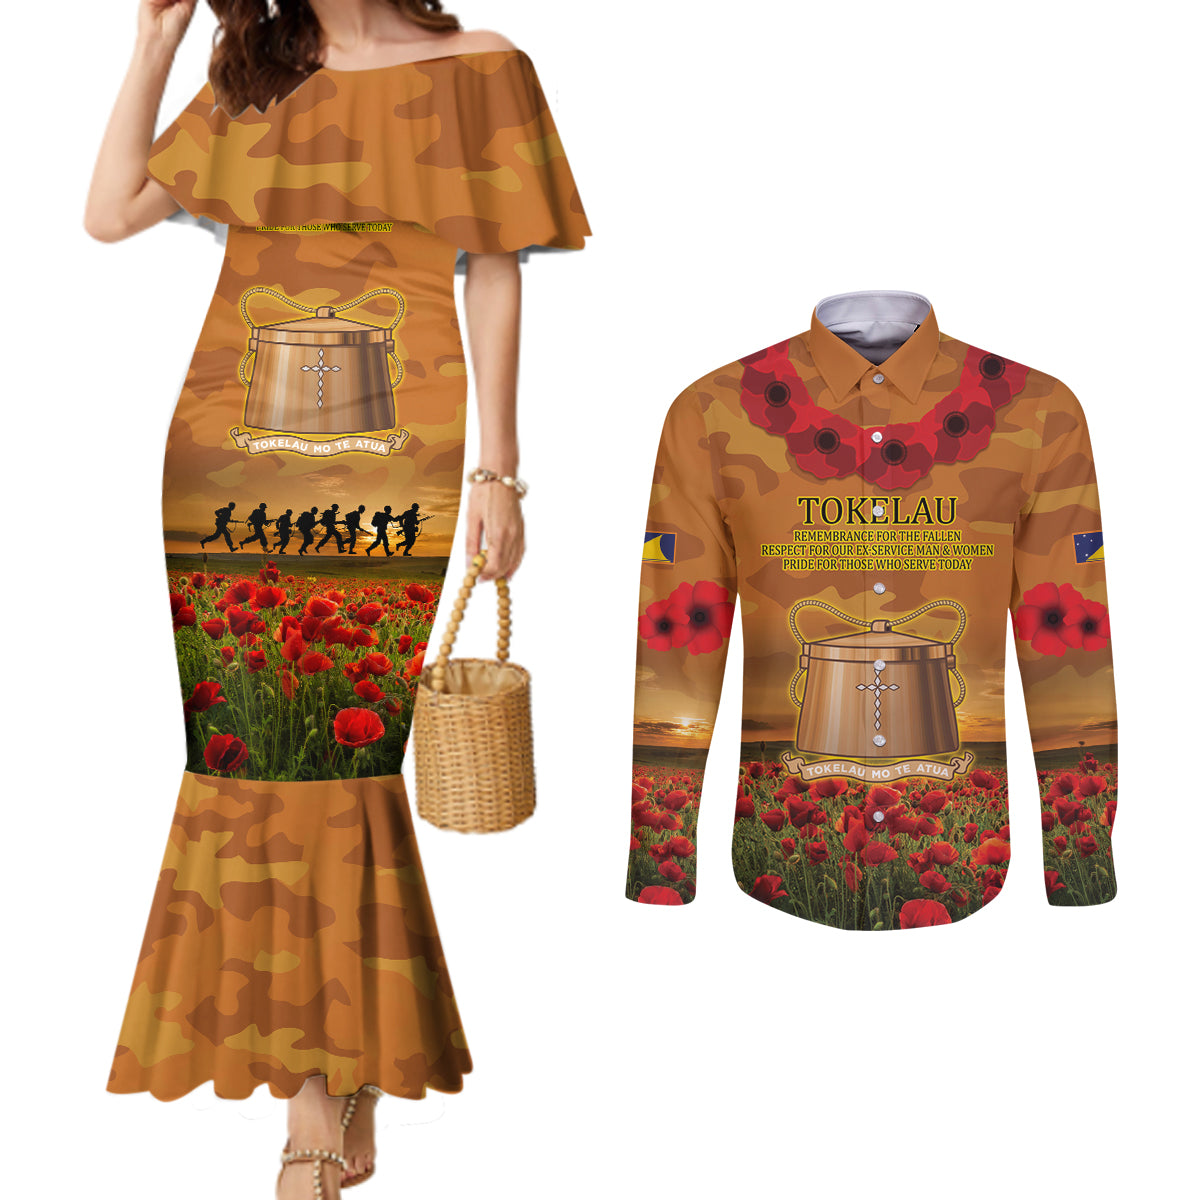 Tokelau ANZAC Day Personalised Couples Matching Mermaid Dress and Long Sleeve Button Shirt with Poppy Field LT9 Art - Polynesian Pride